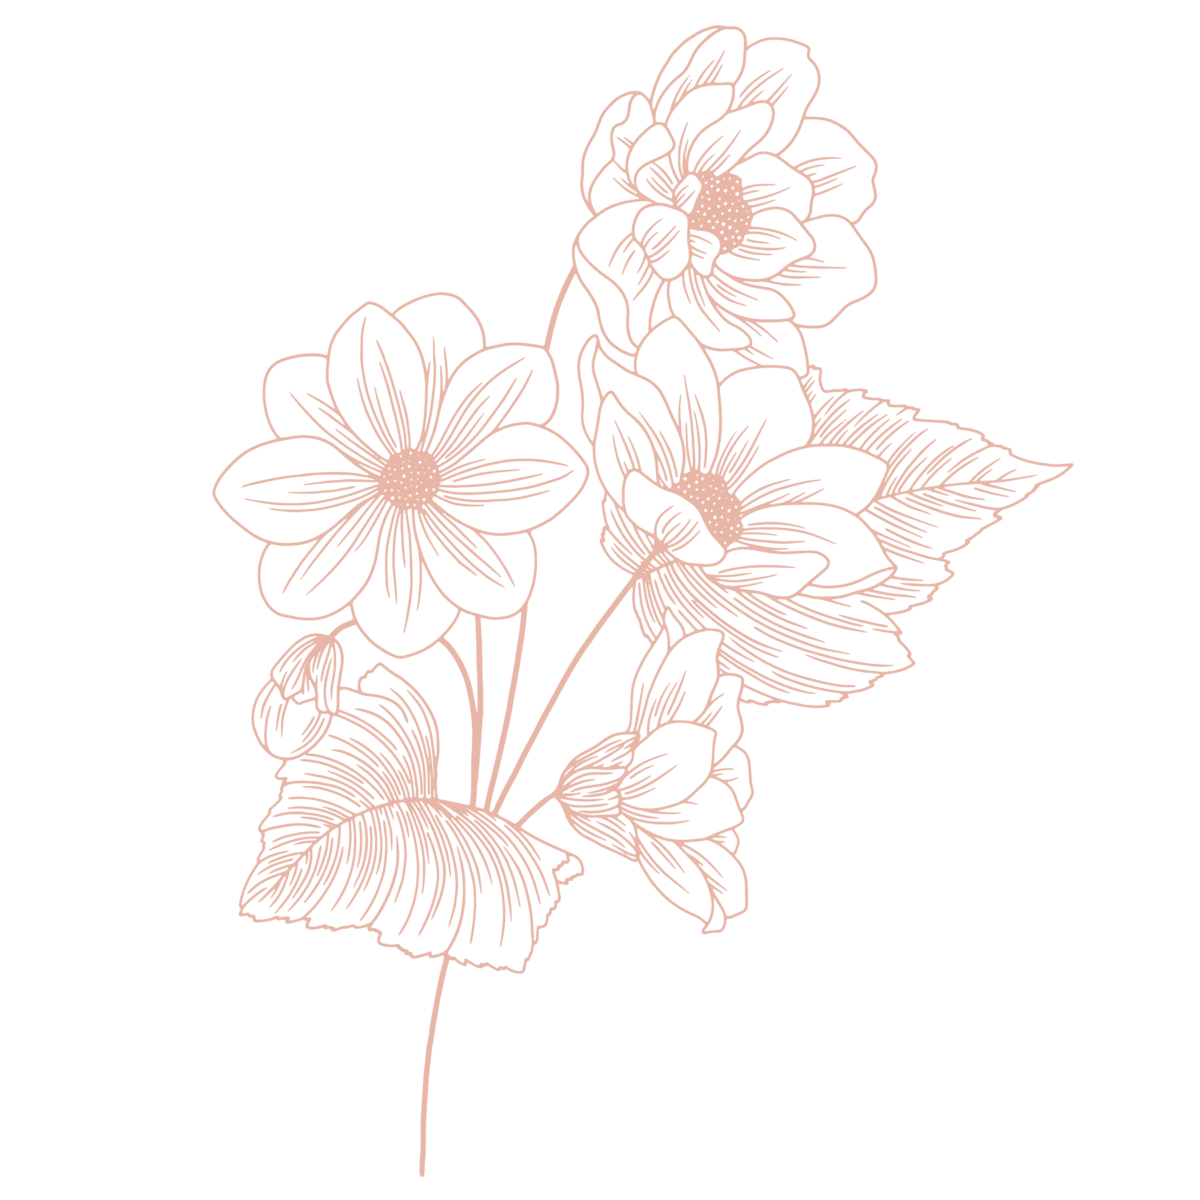 Graphic art, three outlined flowers grow together